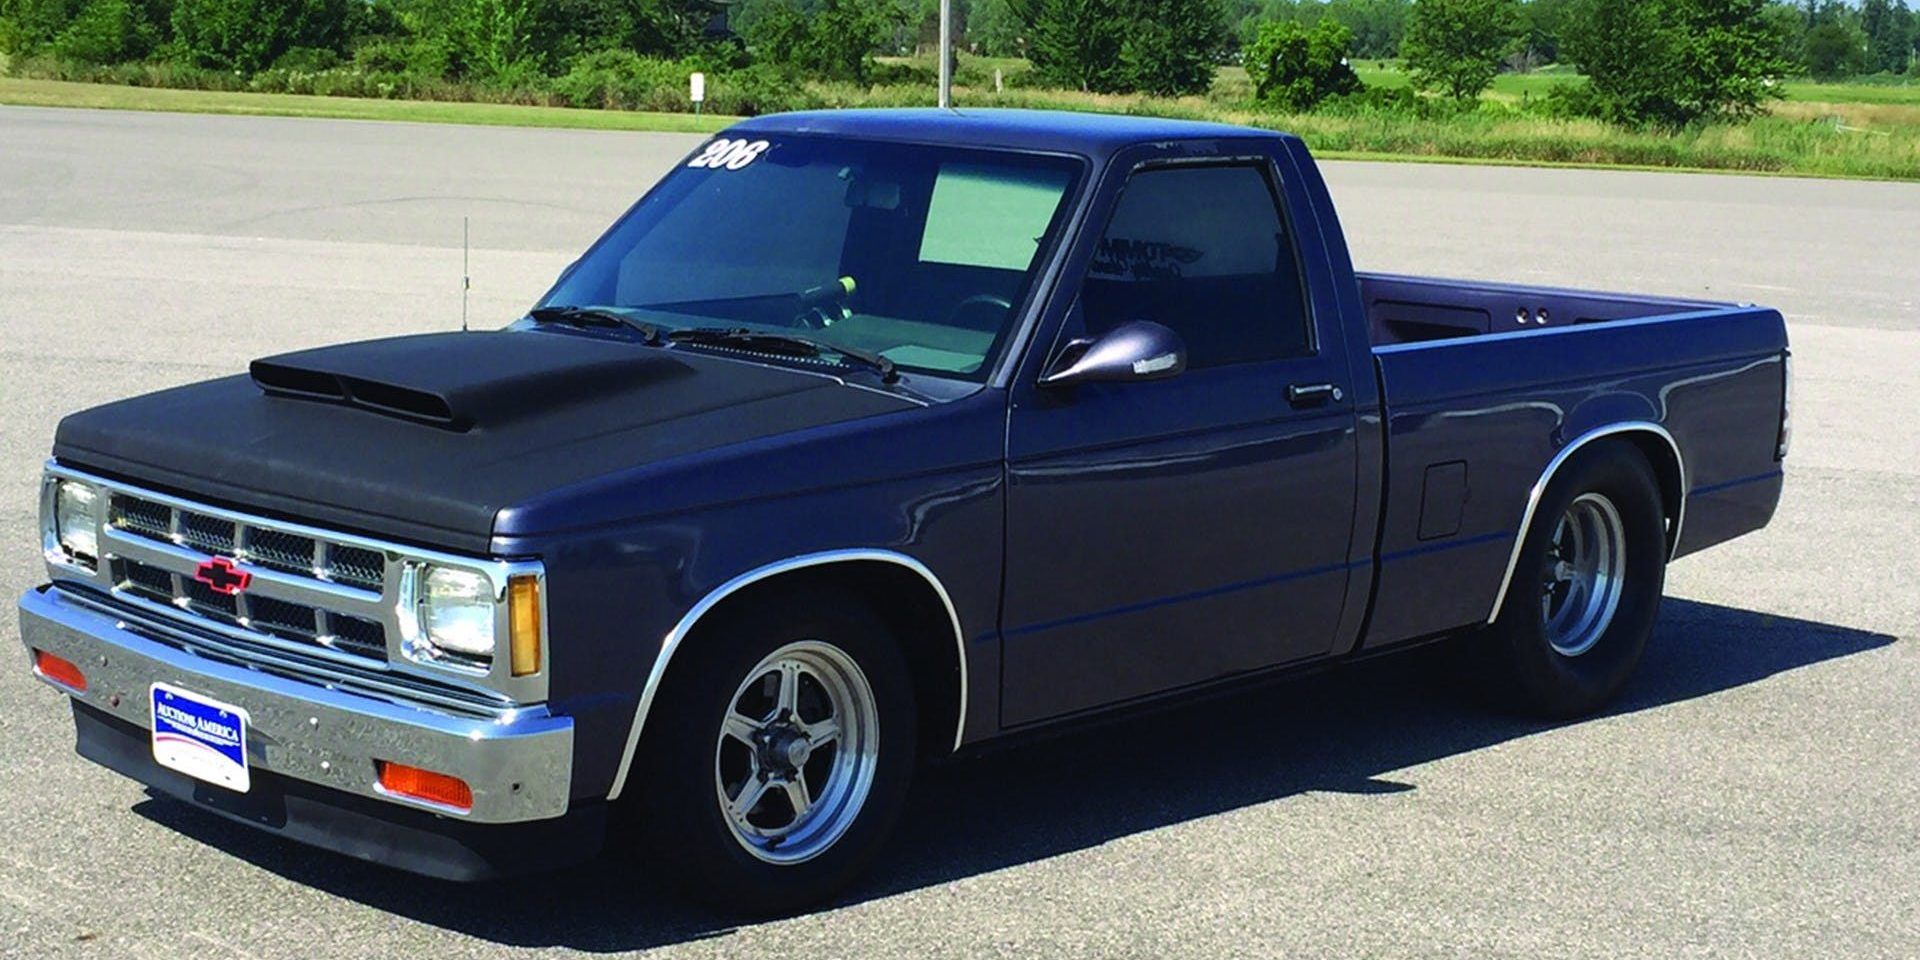 5 Times Chevy Made An Amazing Pickup Truck (5 Times It Missed The Mark)